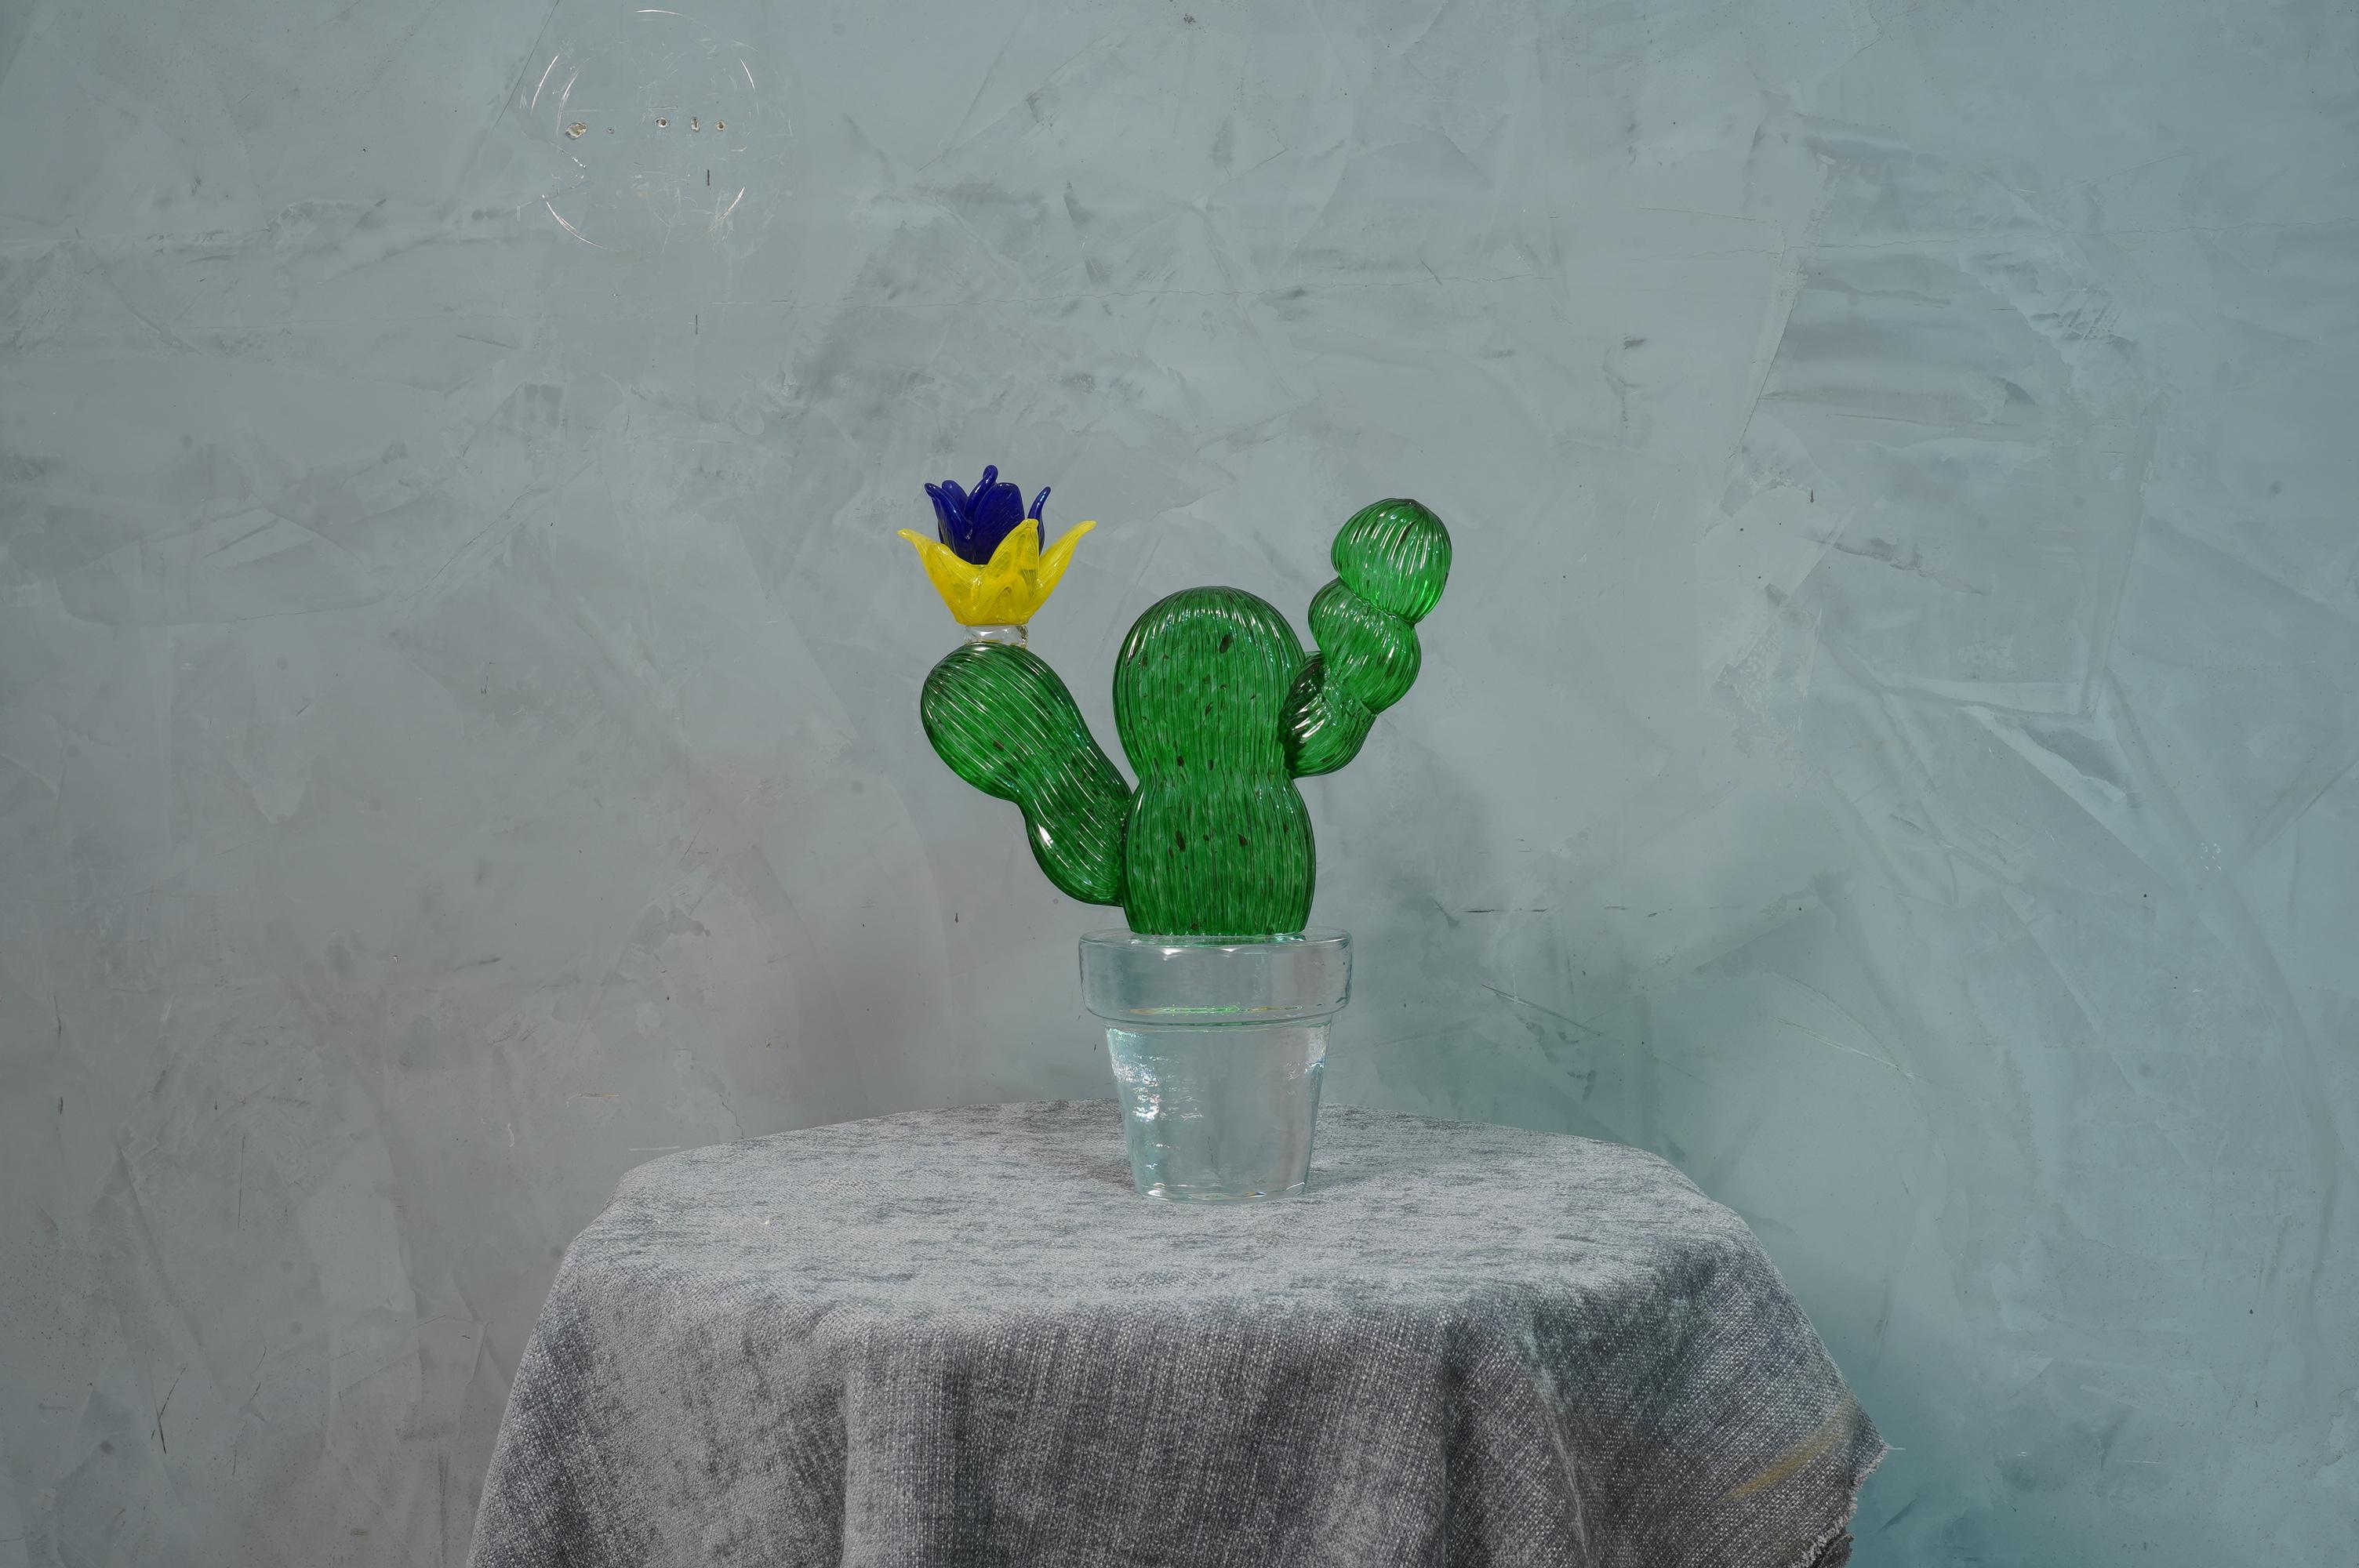 Italian design by Marta Marzotto creator of style, this cactus is a fashion icon of the Italian style, emerald green with a blue and yellow colored spot, the flower.

In limited edition, as can be seen from the writing under the transparent vase